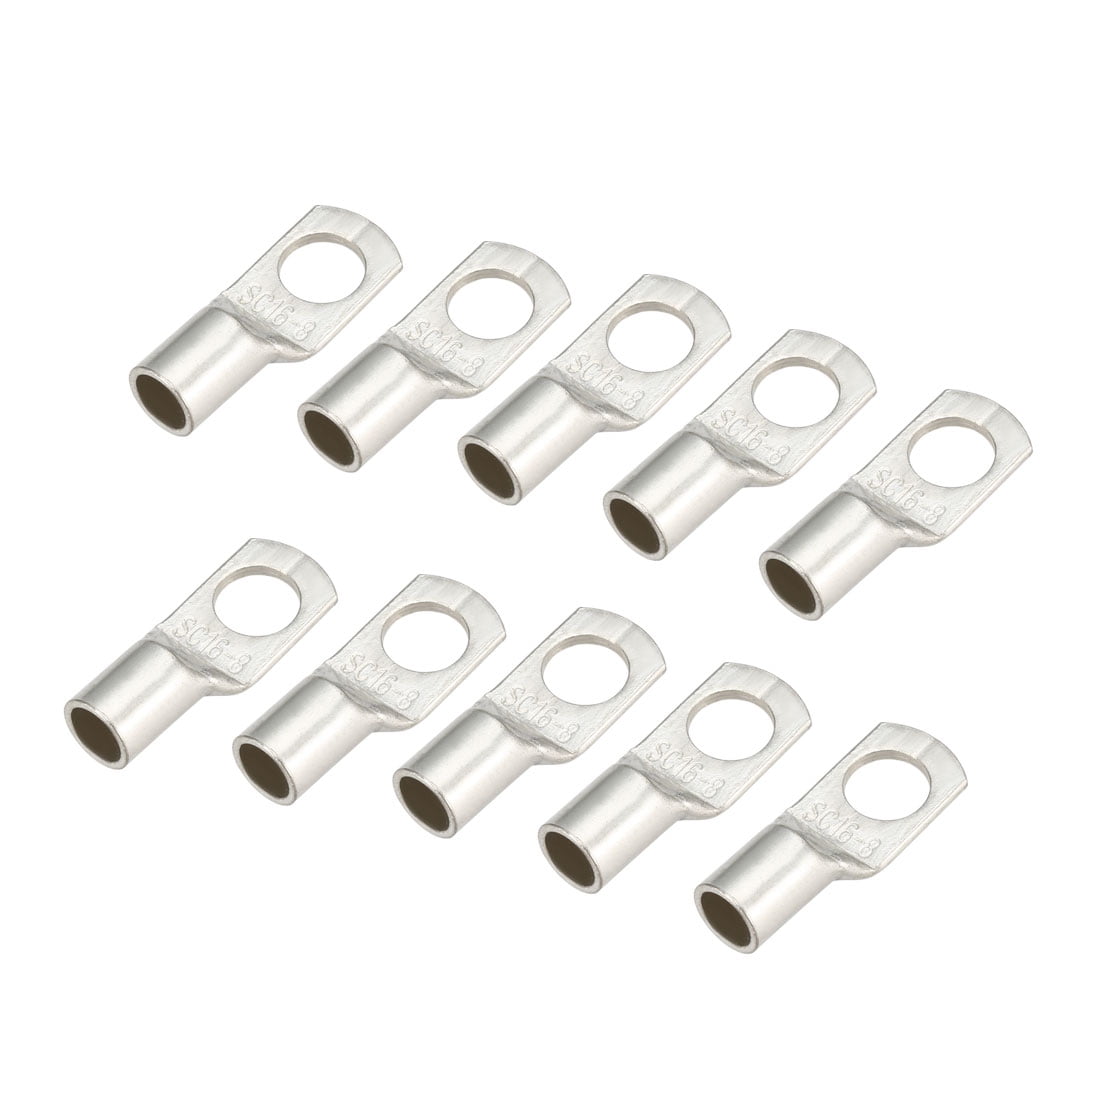 NEW Copper Tube Butt Connector 16mm2 10 Pack 